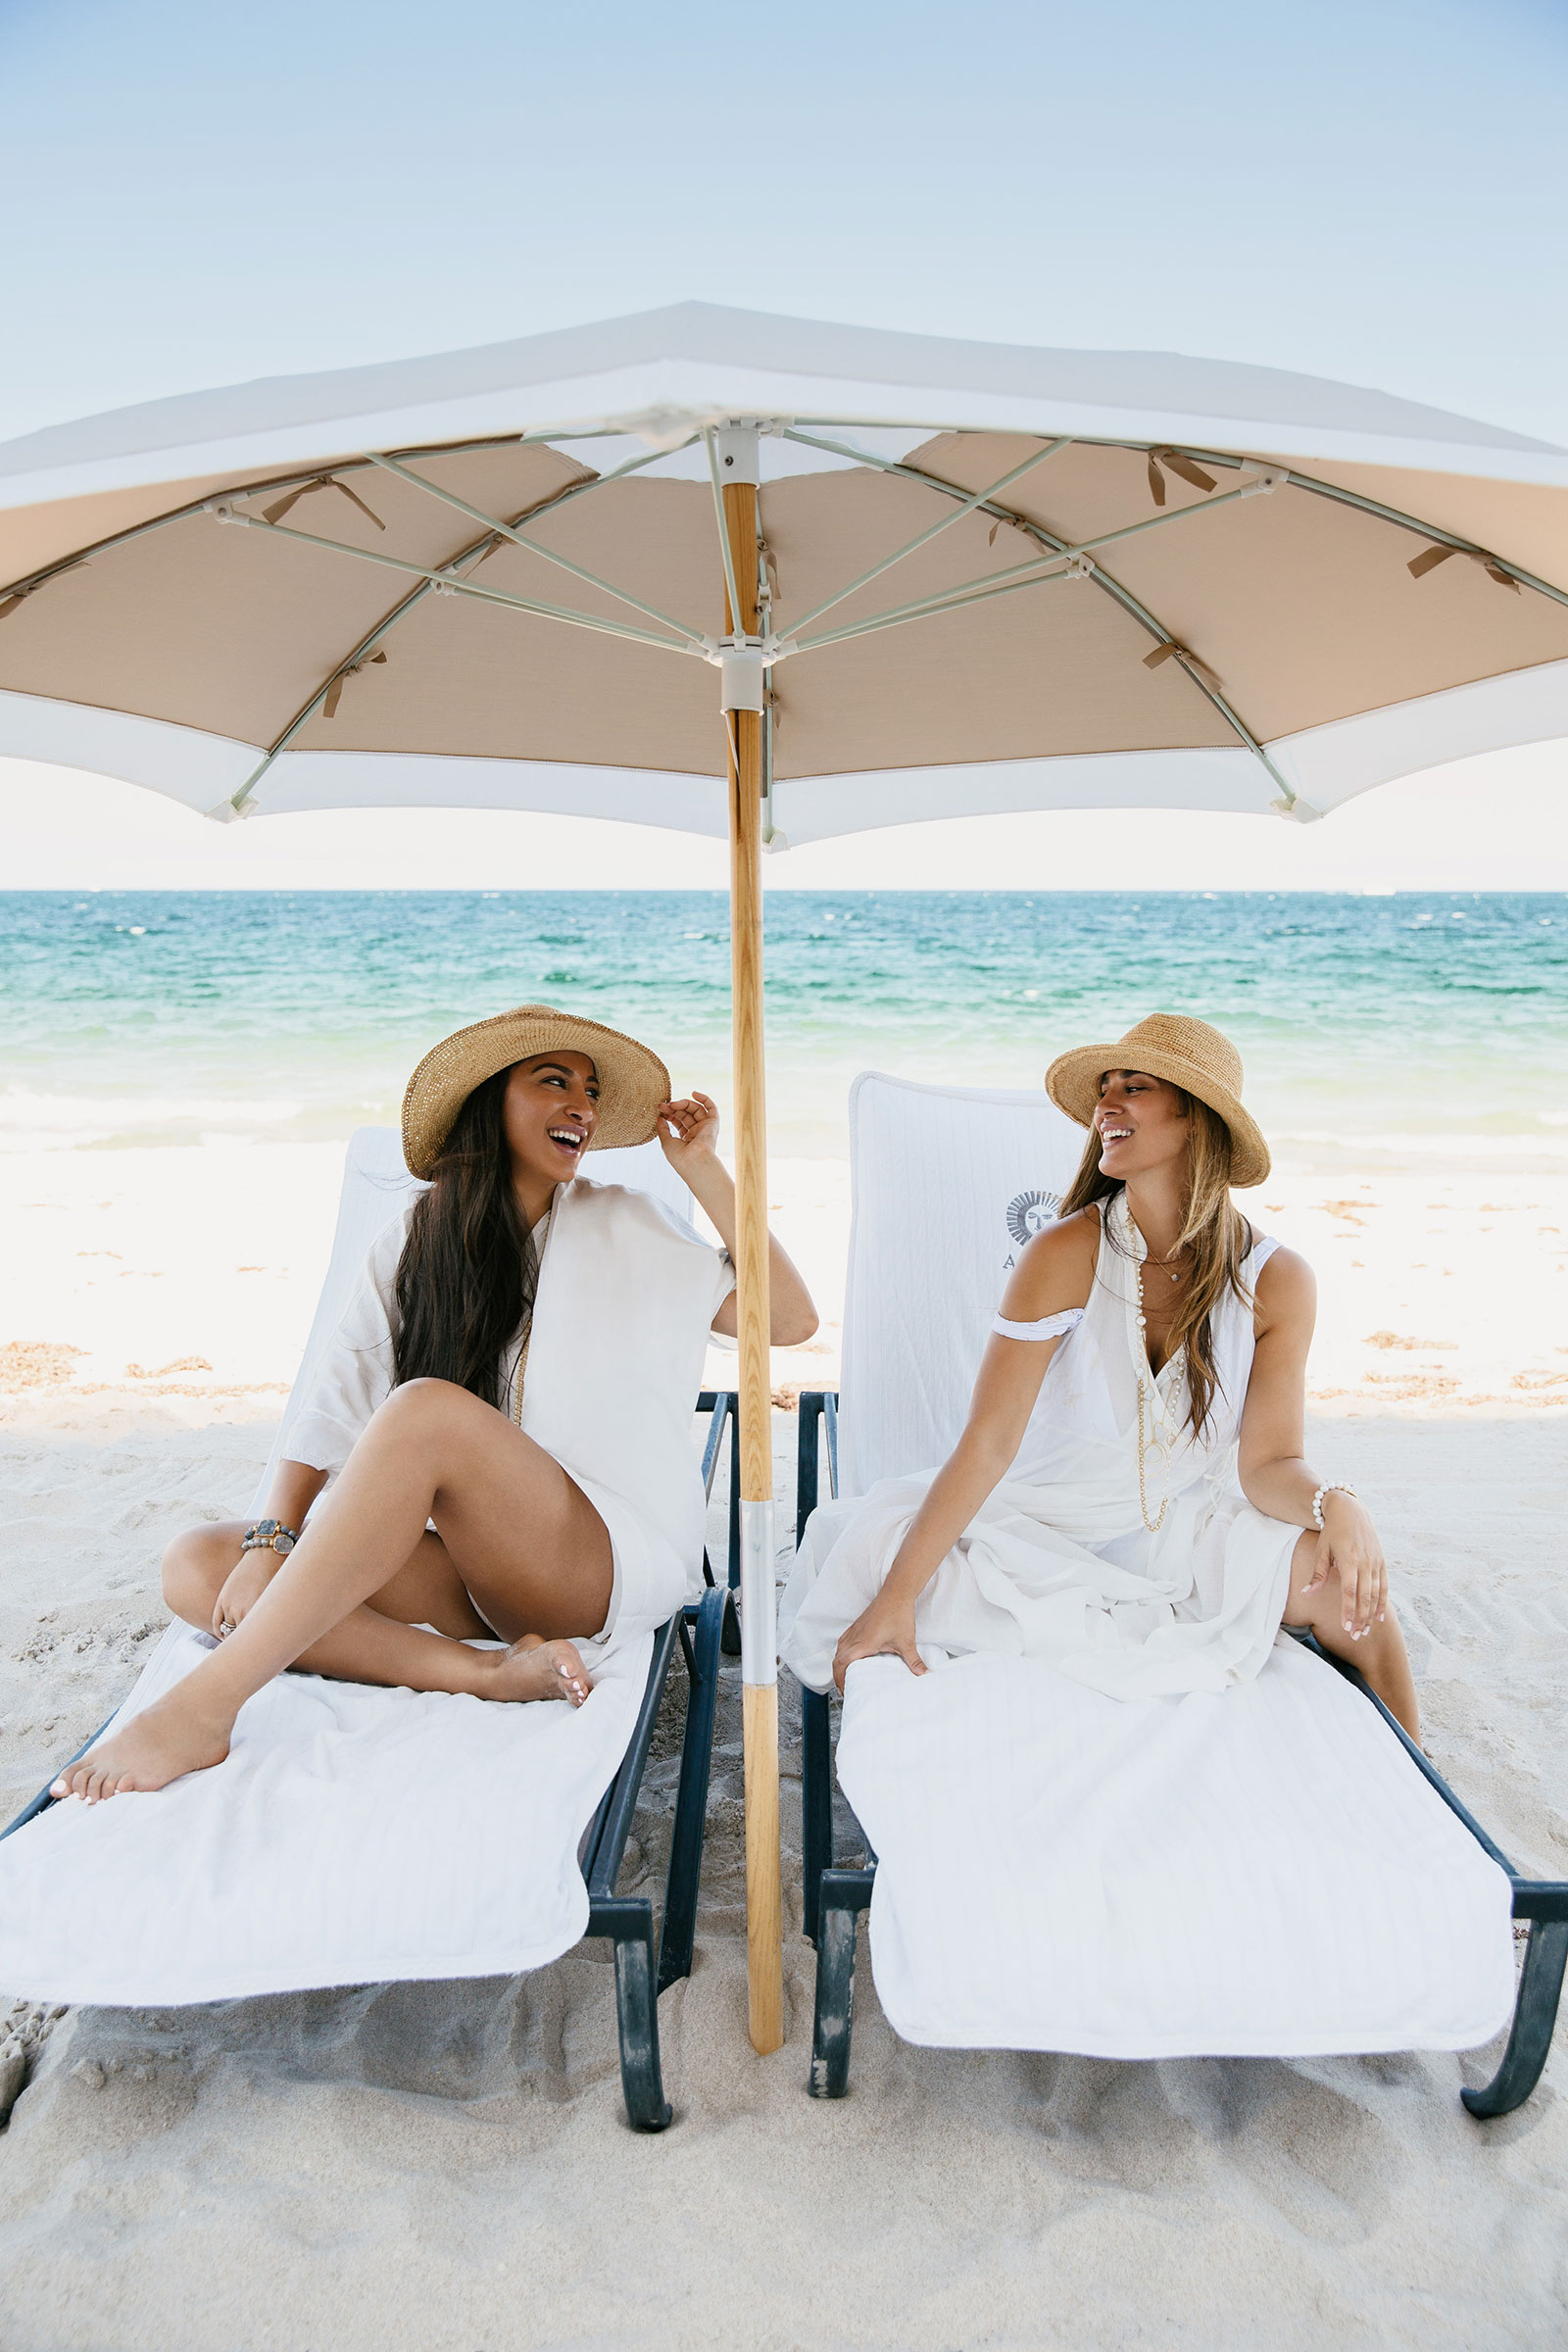 Two women sitting under a white beach umbrella with the ocean behind them.